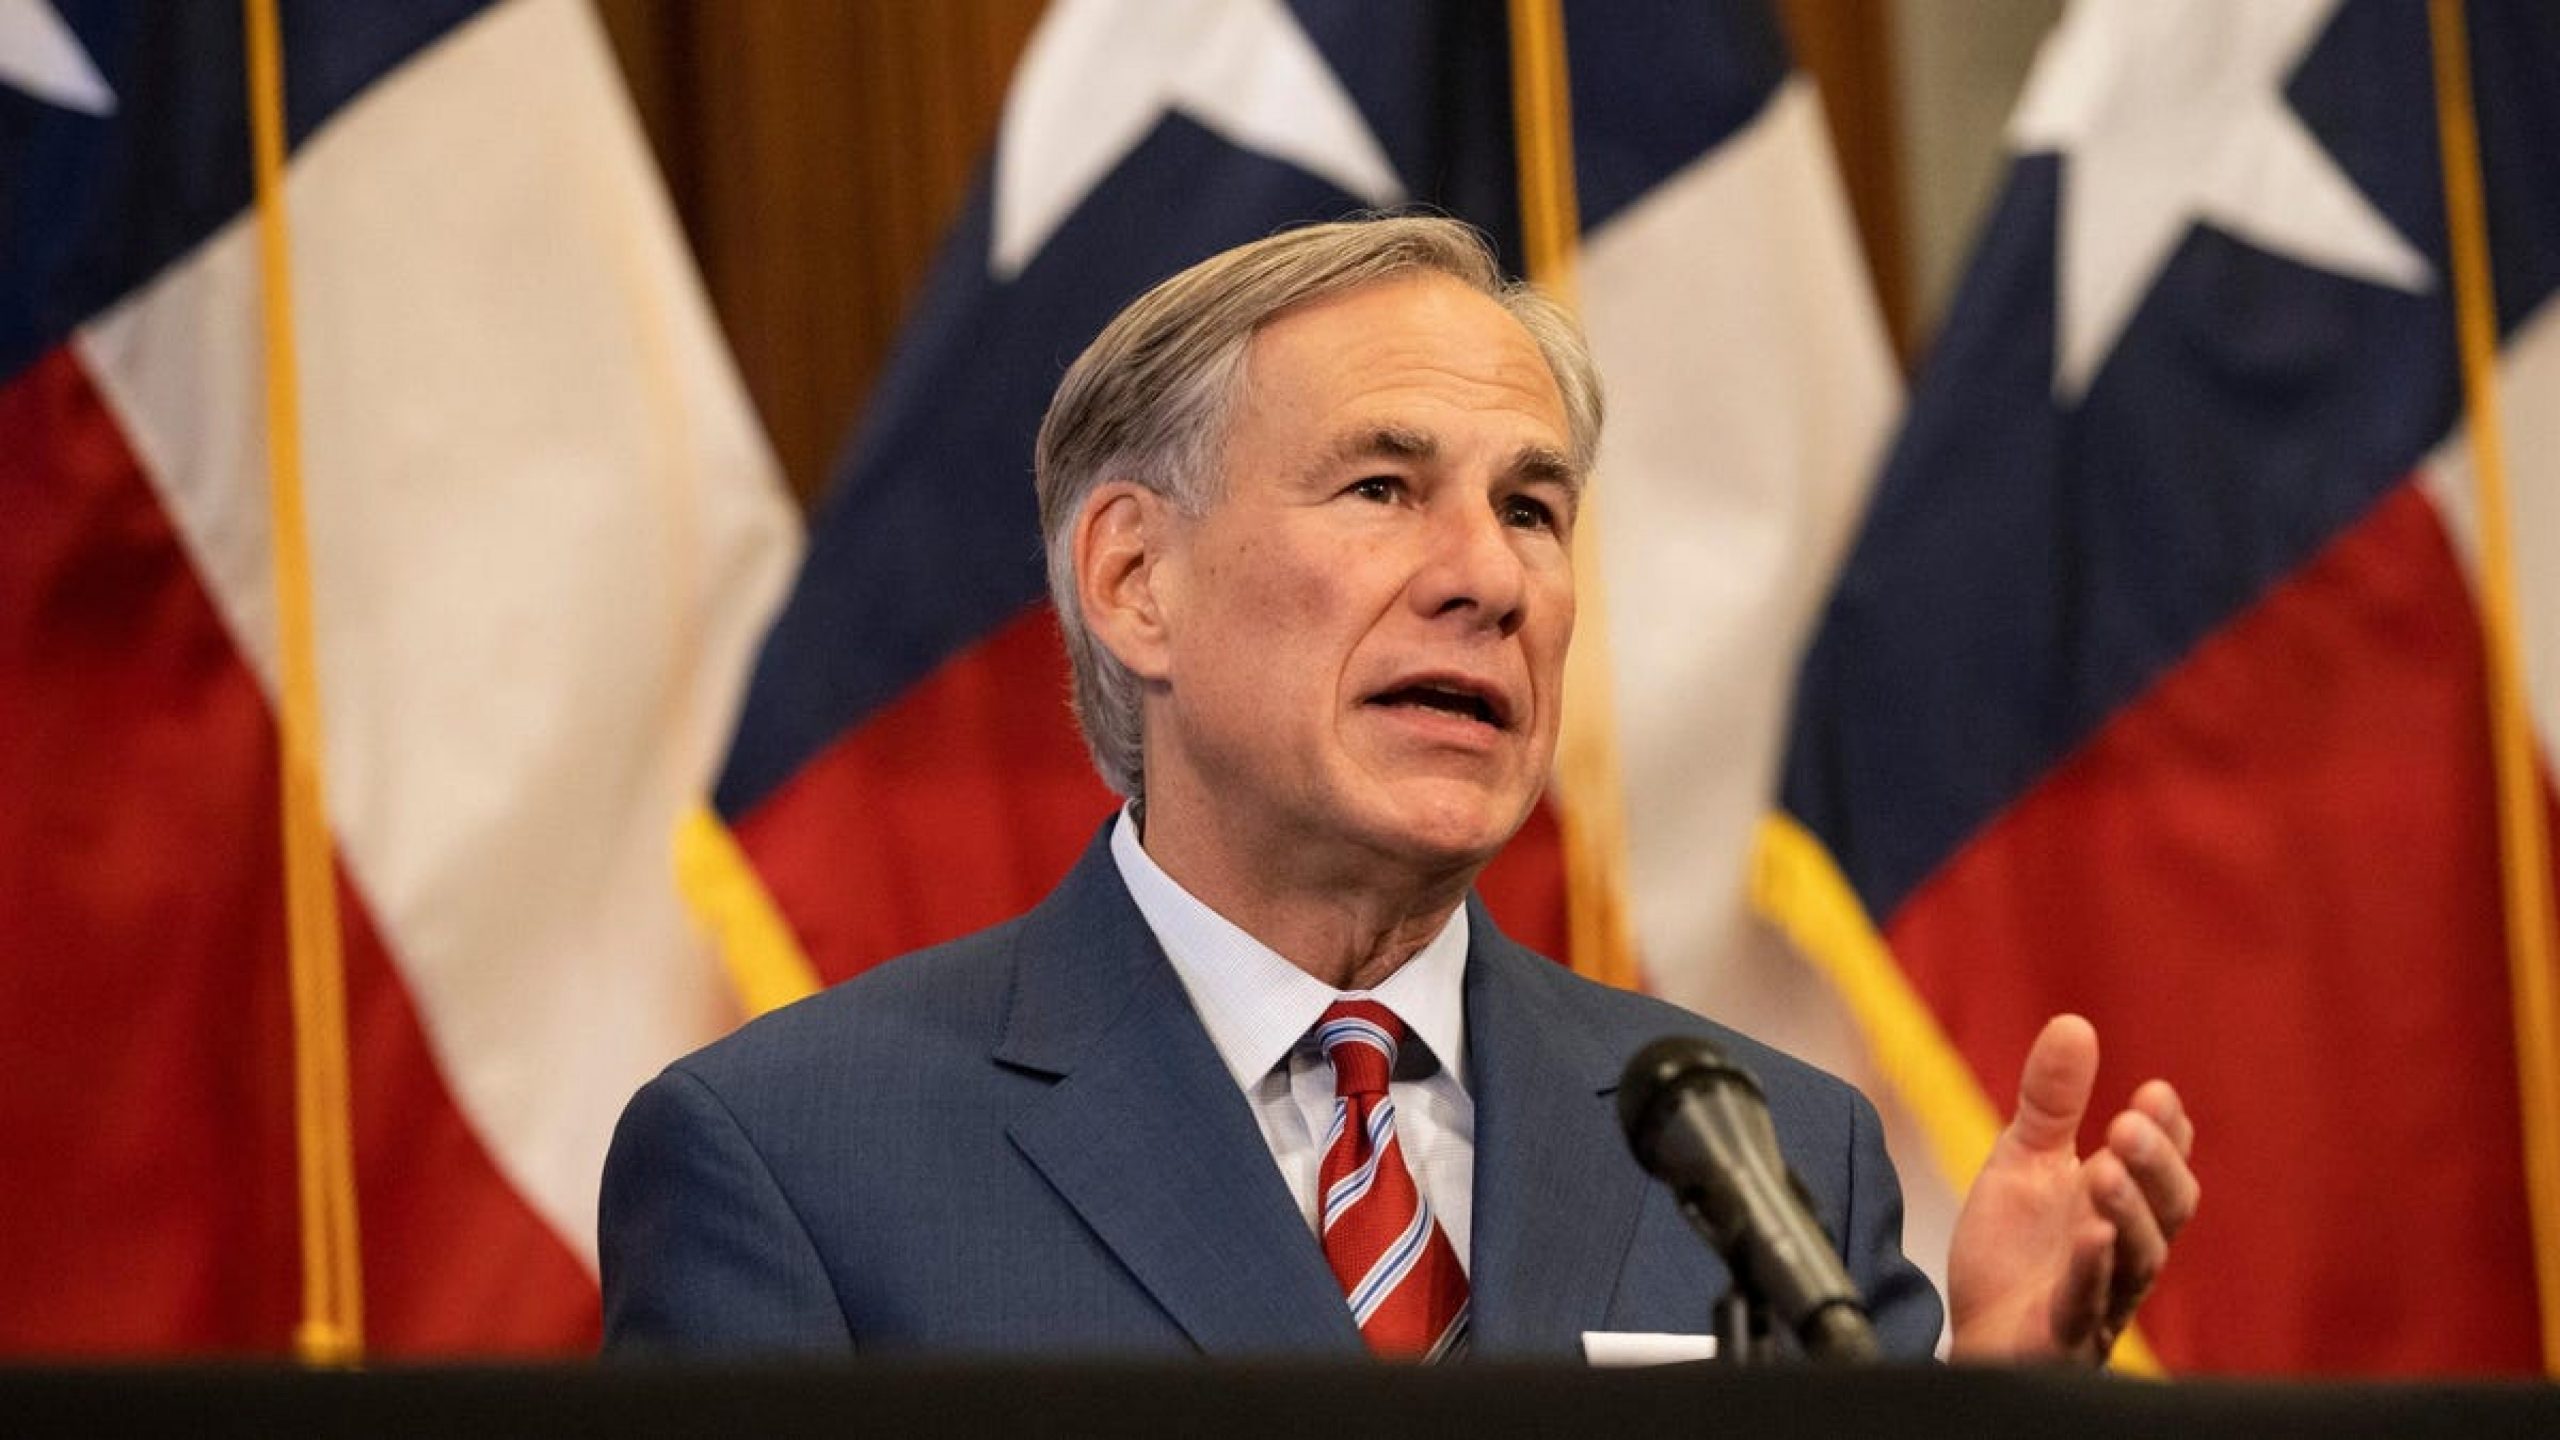 Texas Gov. Greg Abbott Tests Positive for Covid-19 Hours After Attending Maskless Campaign Event